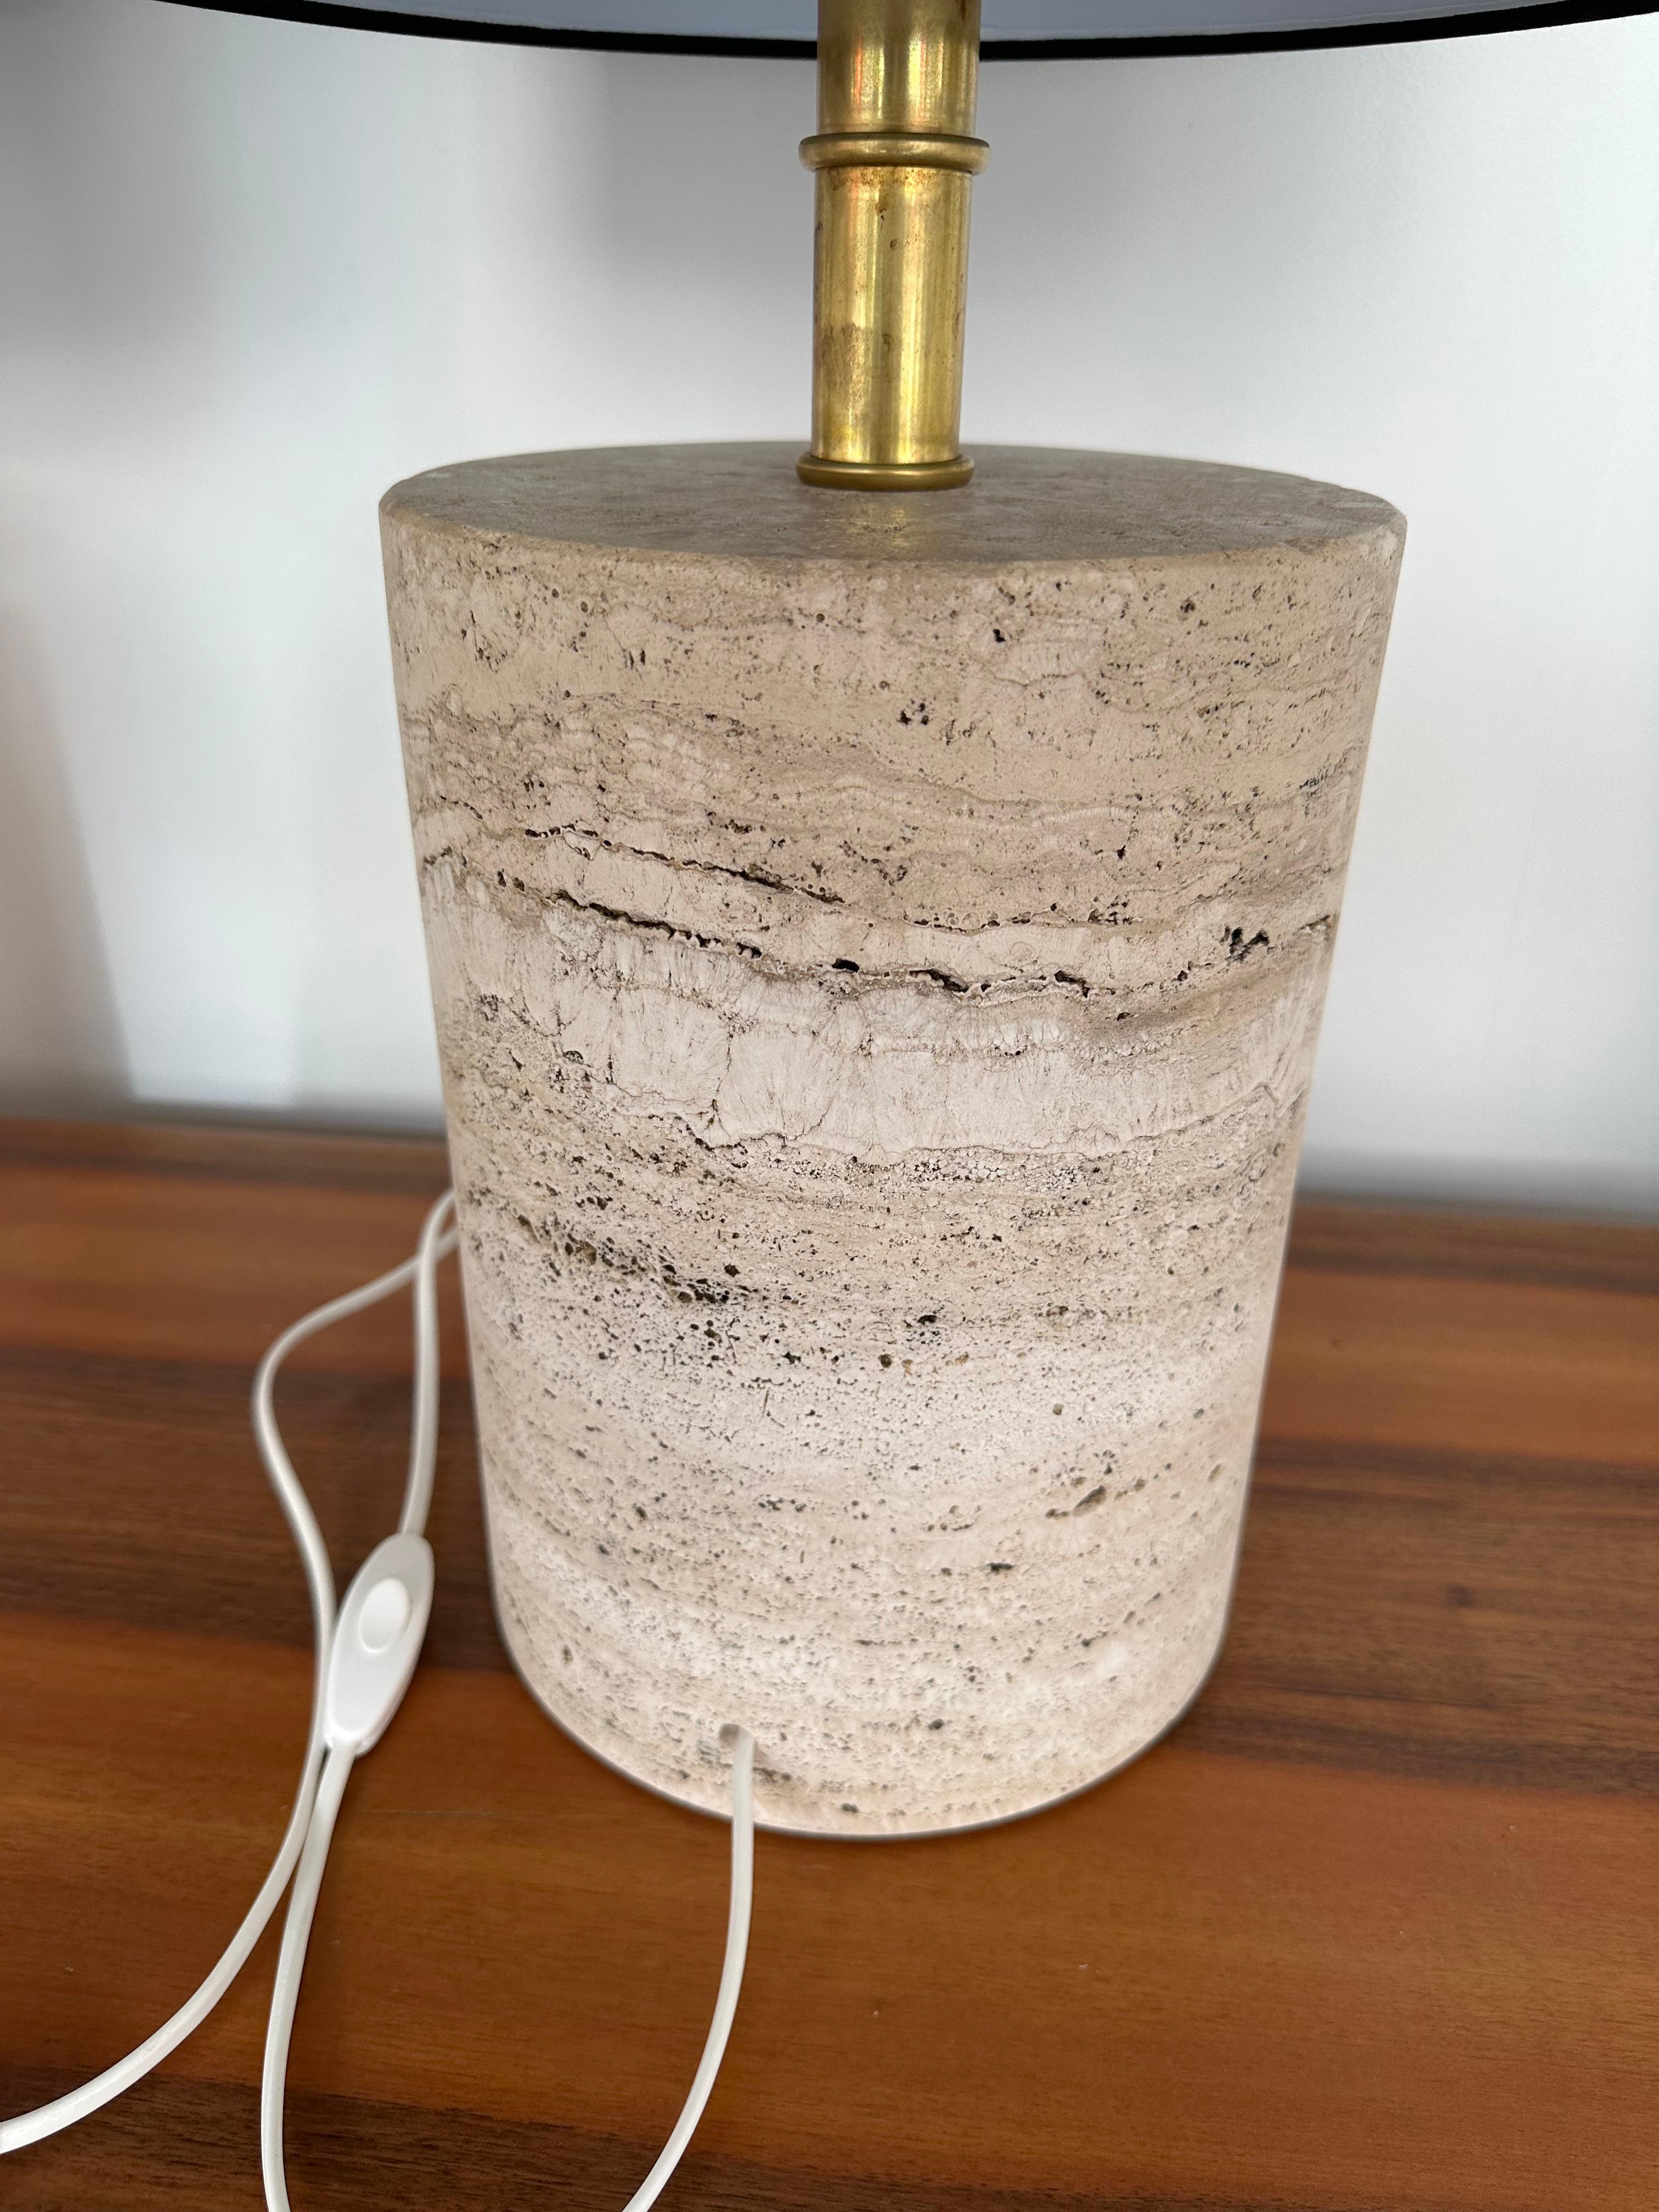 Mid-Century Modern Hollywood Regency style Tall pair of travertine stone a variant of marble and brass table or bedside lamps. Come with nice black shades. Measurements lamps only H45.5 x D20 centimeters

